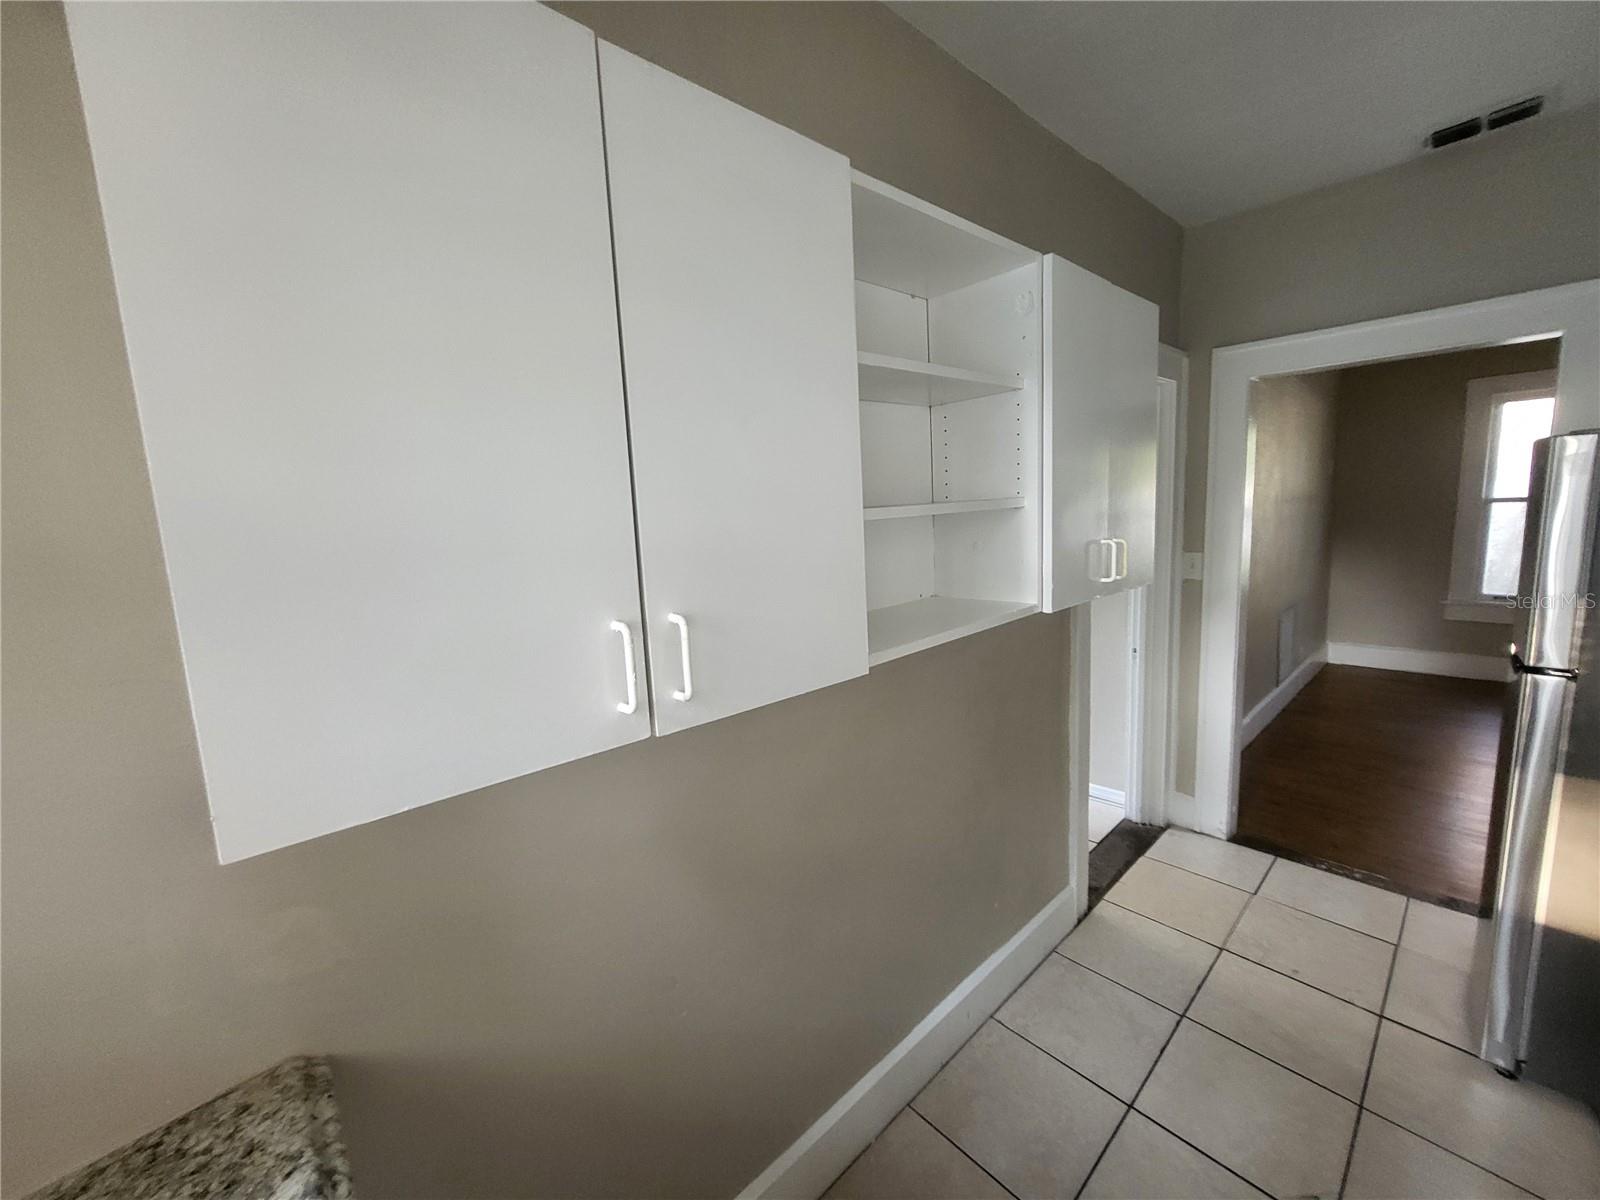 Extra cabinets and open storage on the opposite side of the of the kitchen